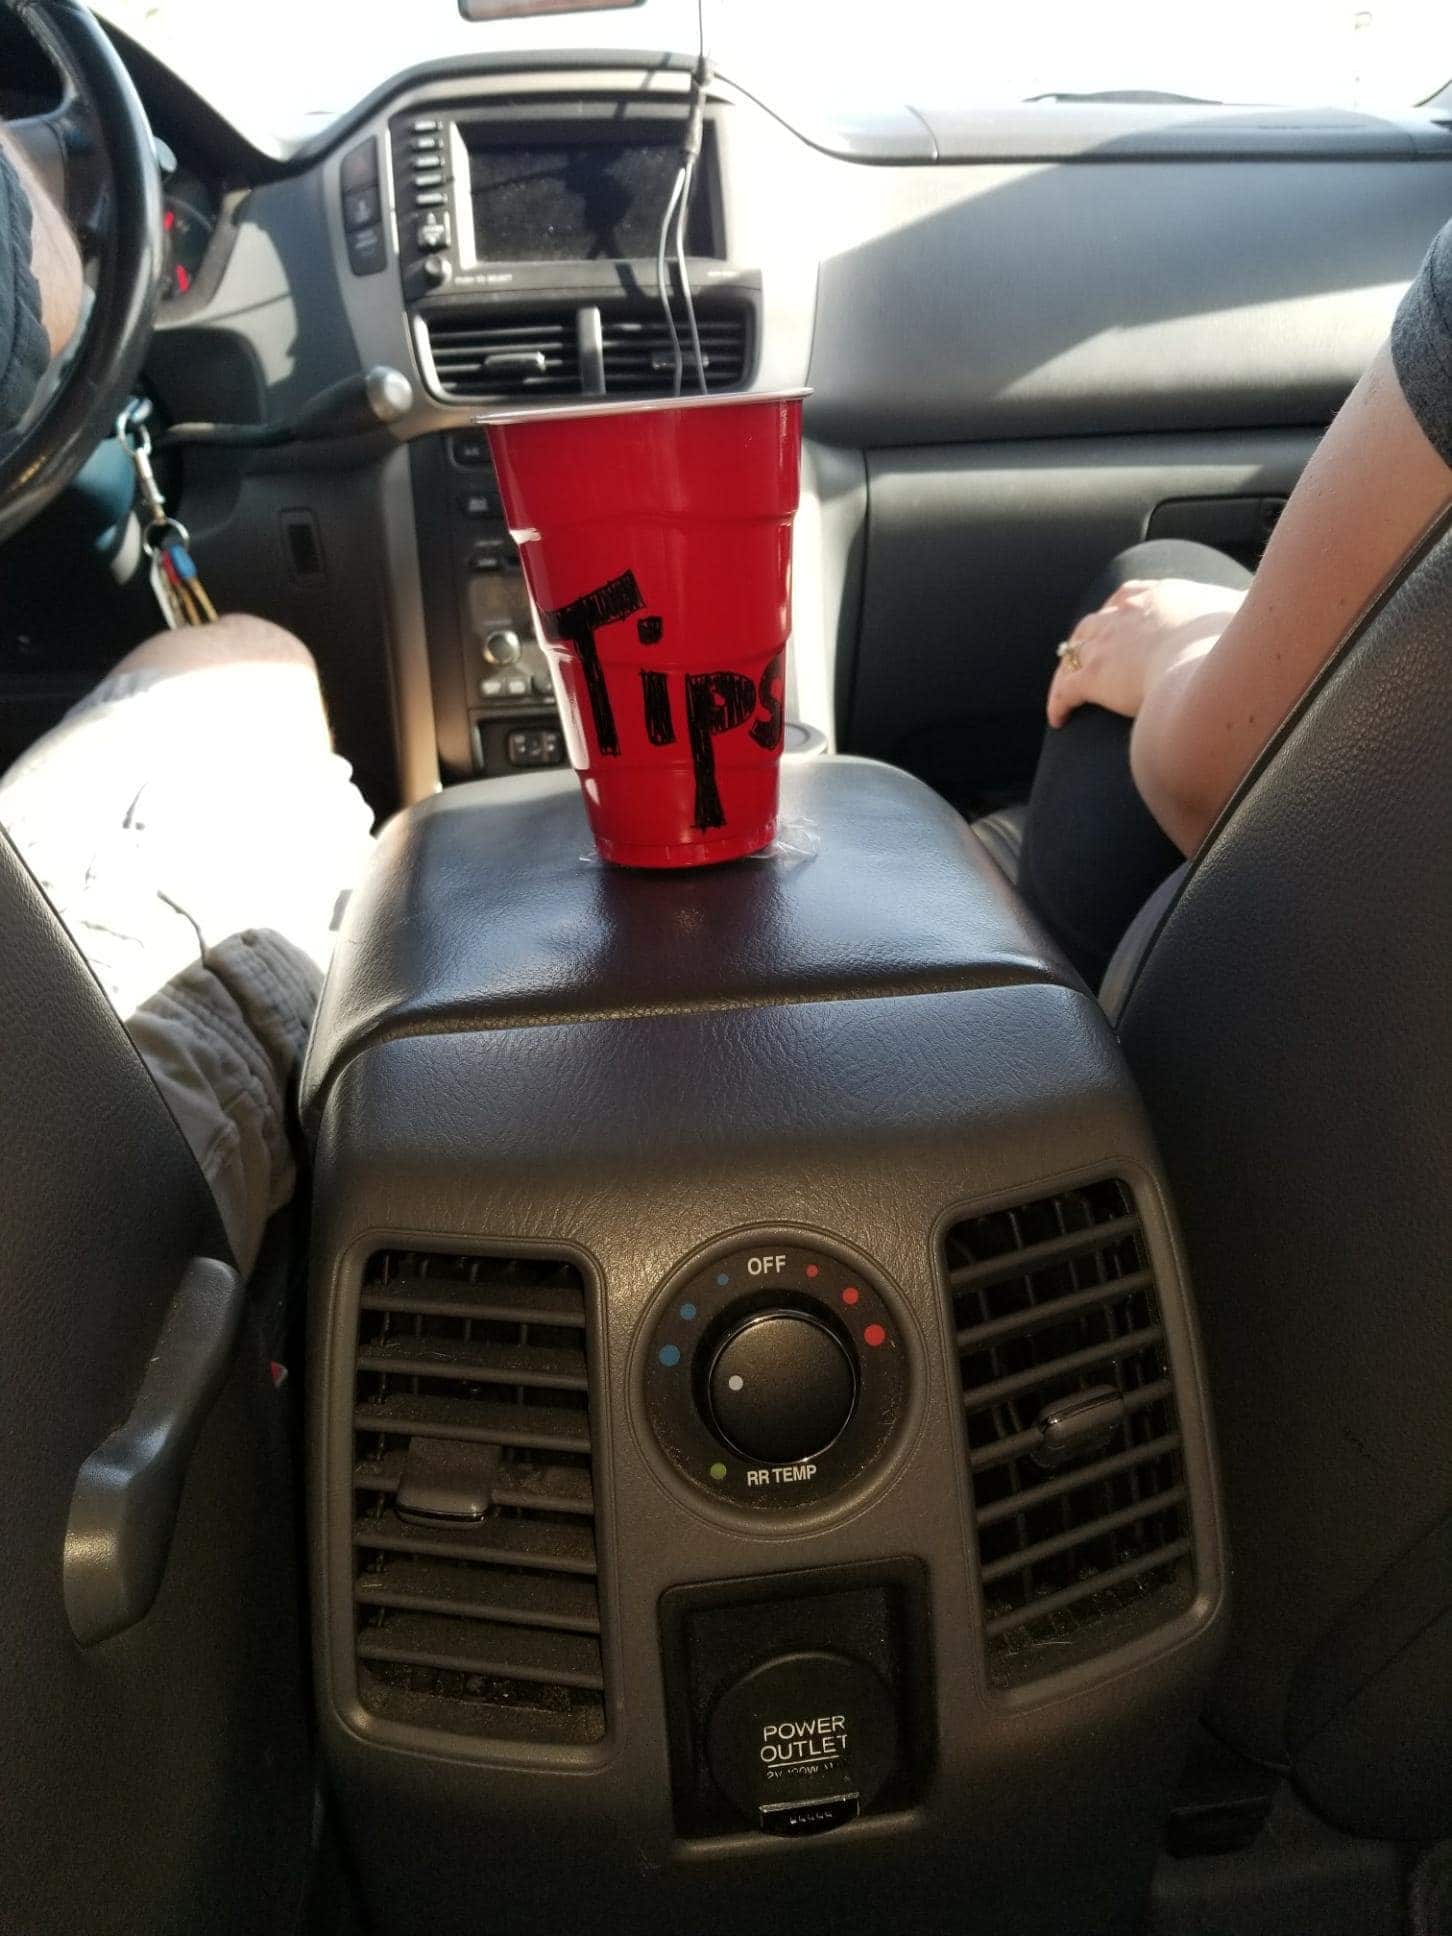 We provided a "tip jar" for our passengers to fill up.